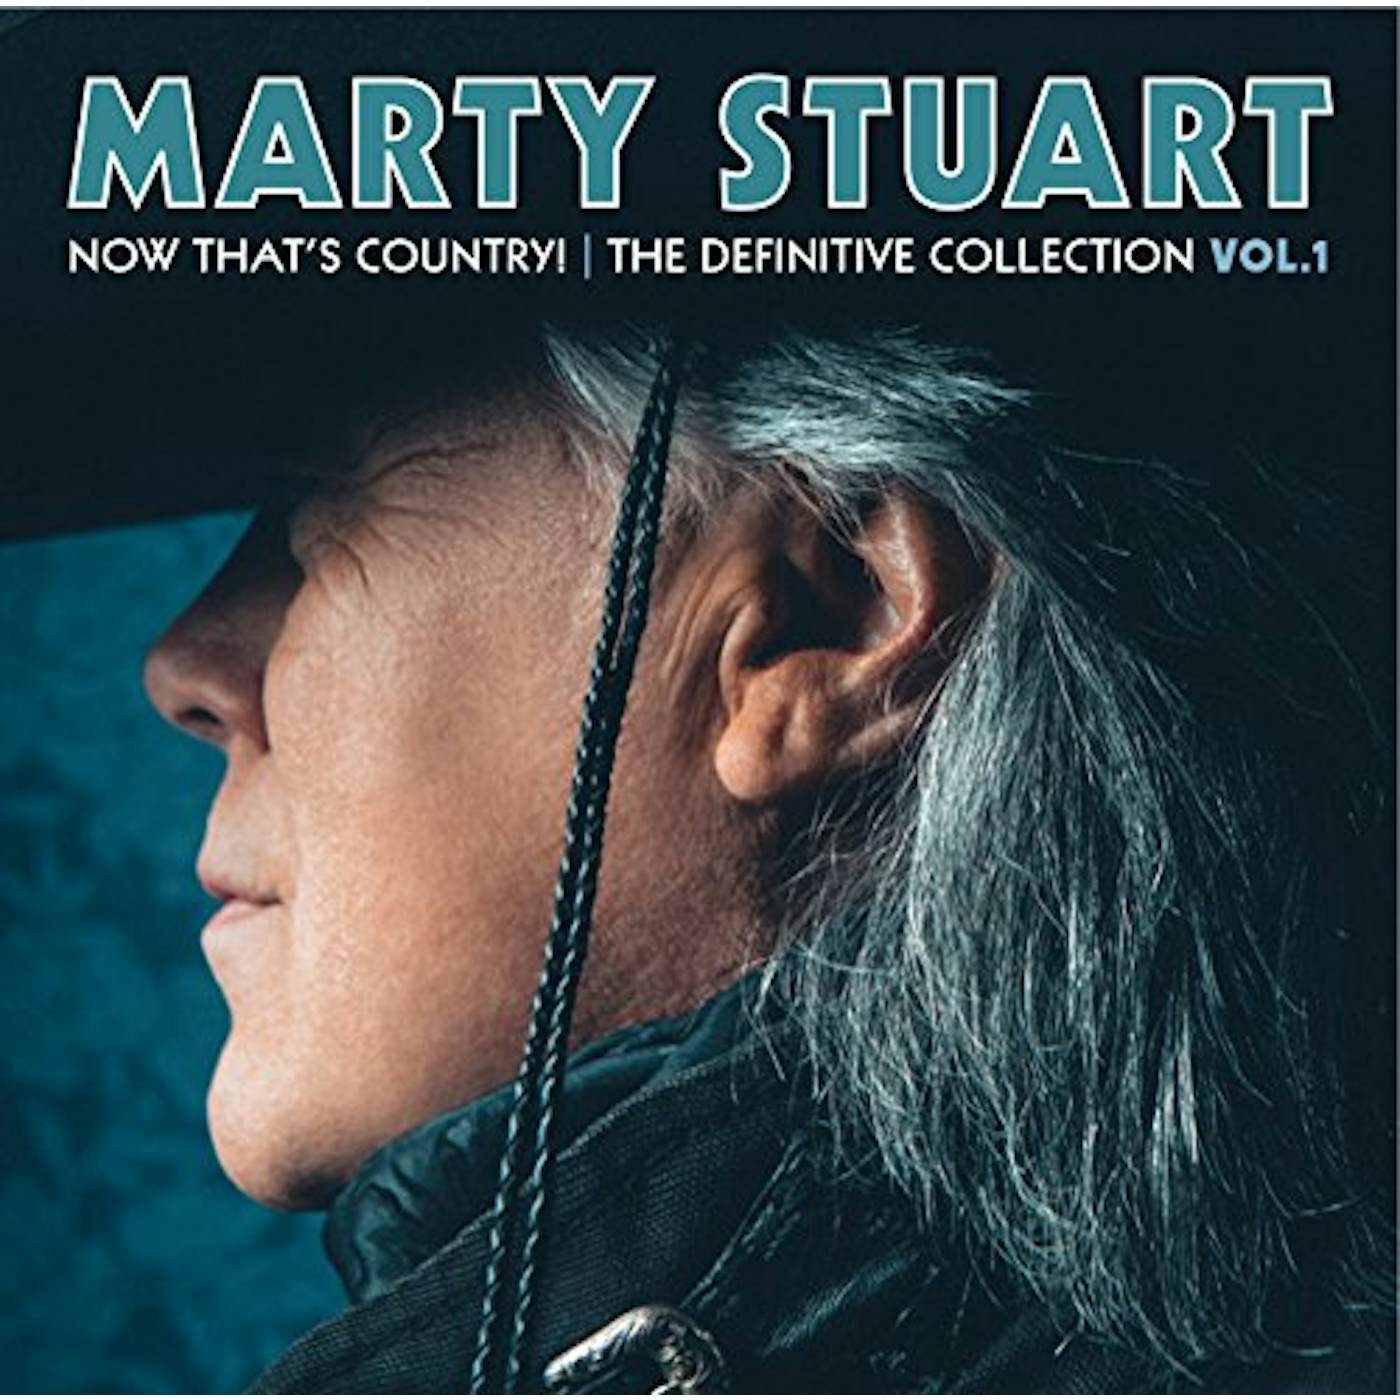 Marty Stuart NOW THAT'S COUNTRY: DEFINITIVE COLLECTION VOL 1 CD